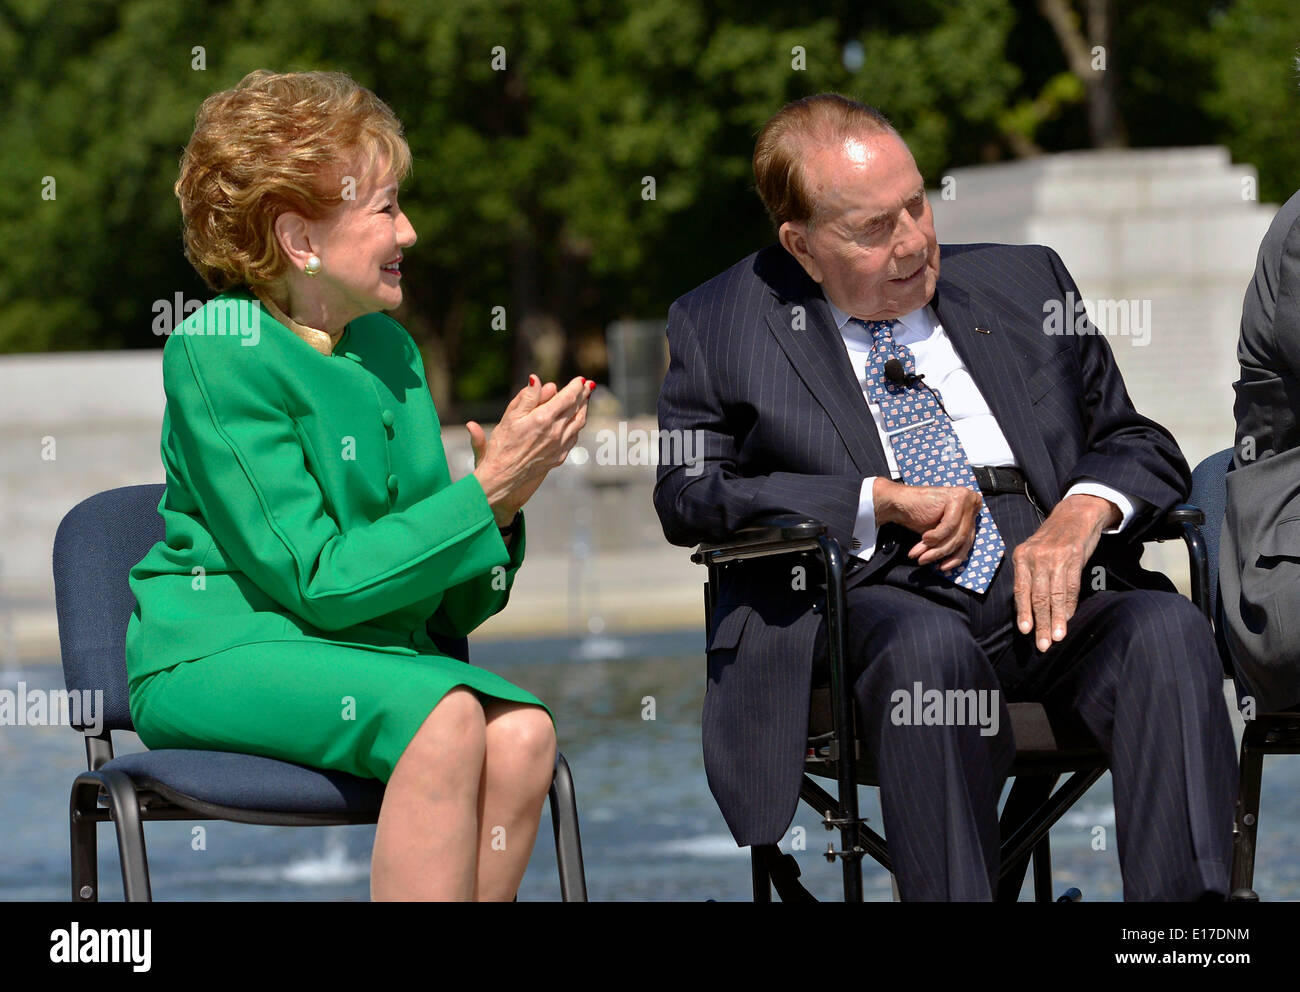 Former Senator Elizabeth Dole applauds as her husband former Senator and presidential candidate Bob Dole, is recognized by Secretary of Defense Chuck Hagel during his keynote address at a ceremony marking the tenth anniversary of the WW II Memorial May 24, 2014 in Washington, D.C. Stock Photo